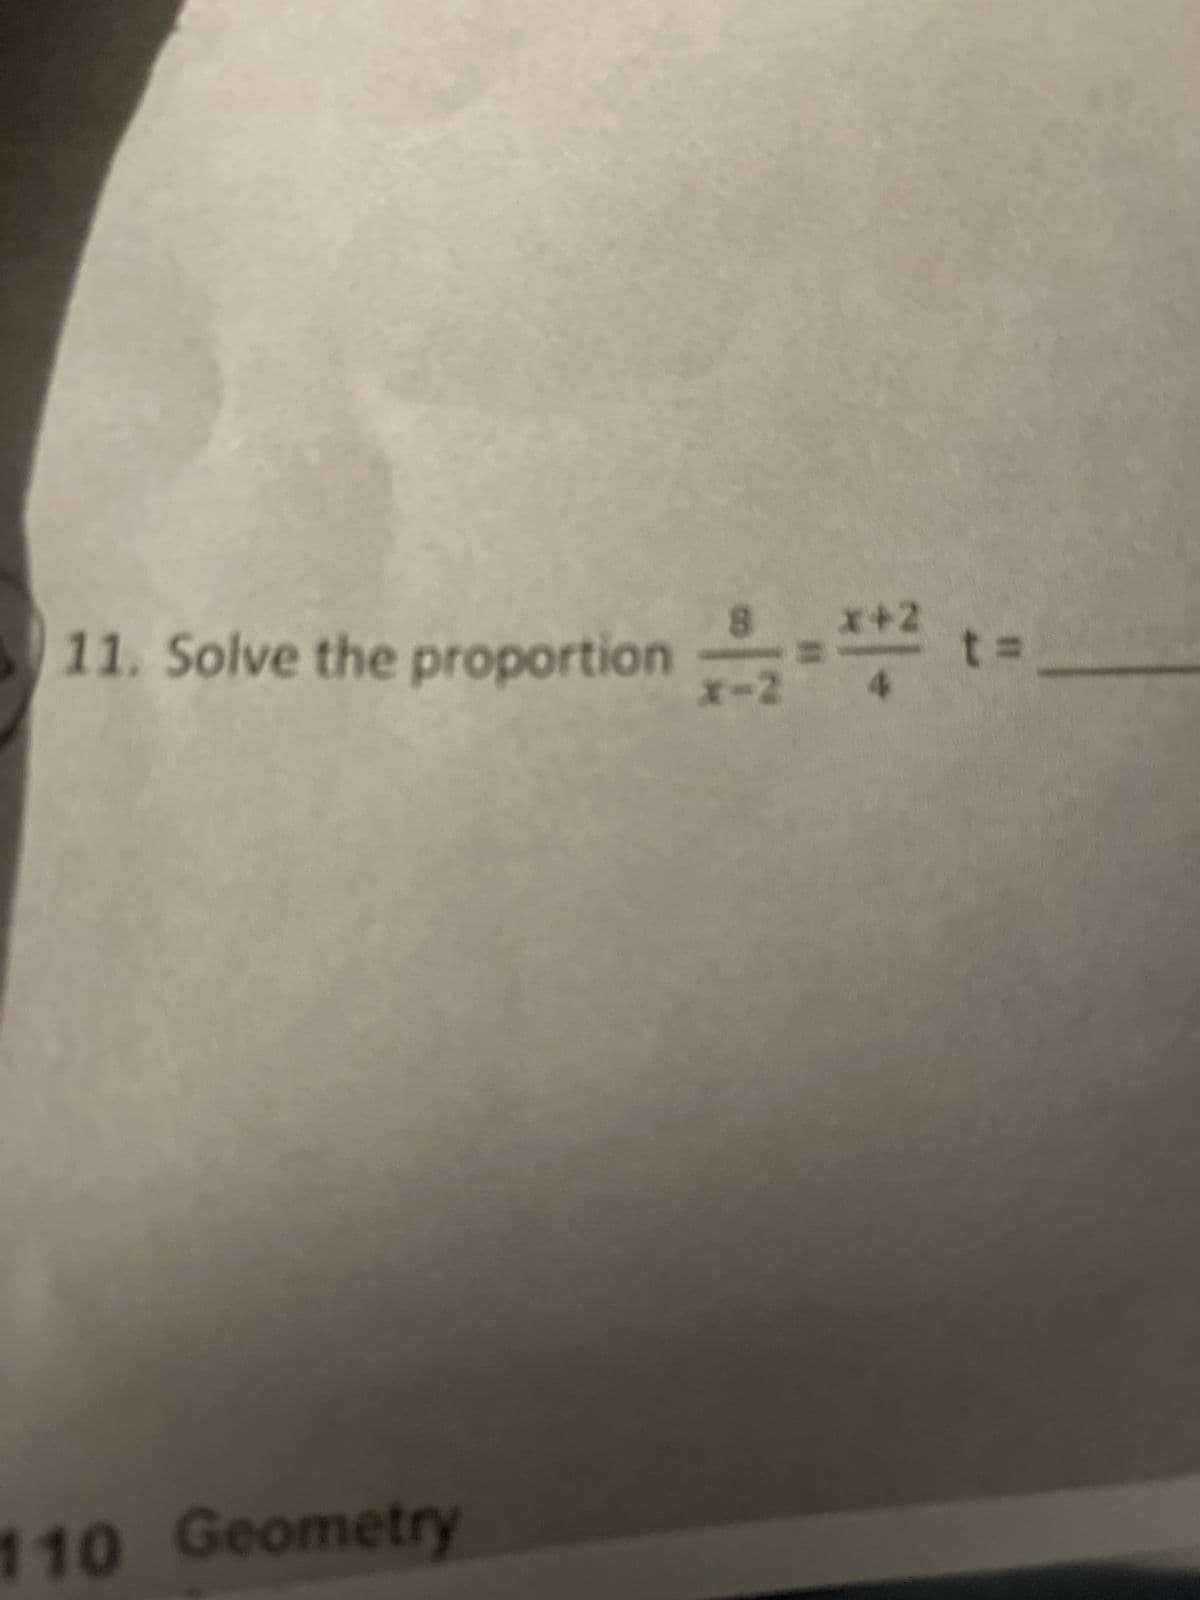 8 X+2
11. Solve the proportion ====2 t=
110 Geometry